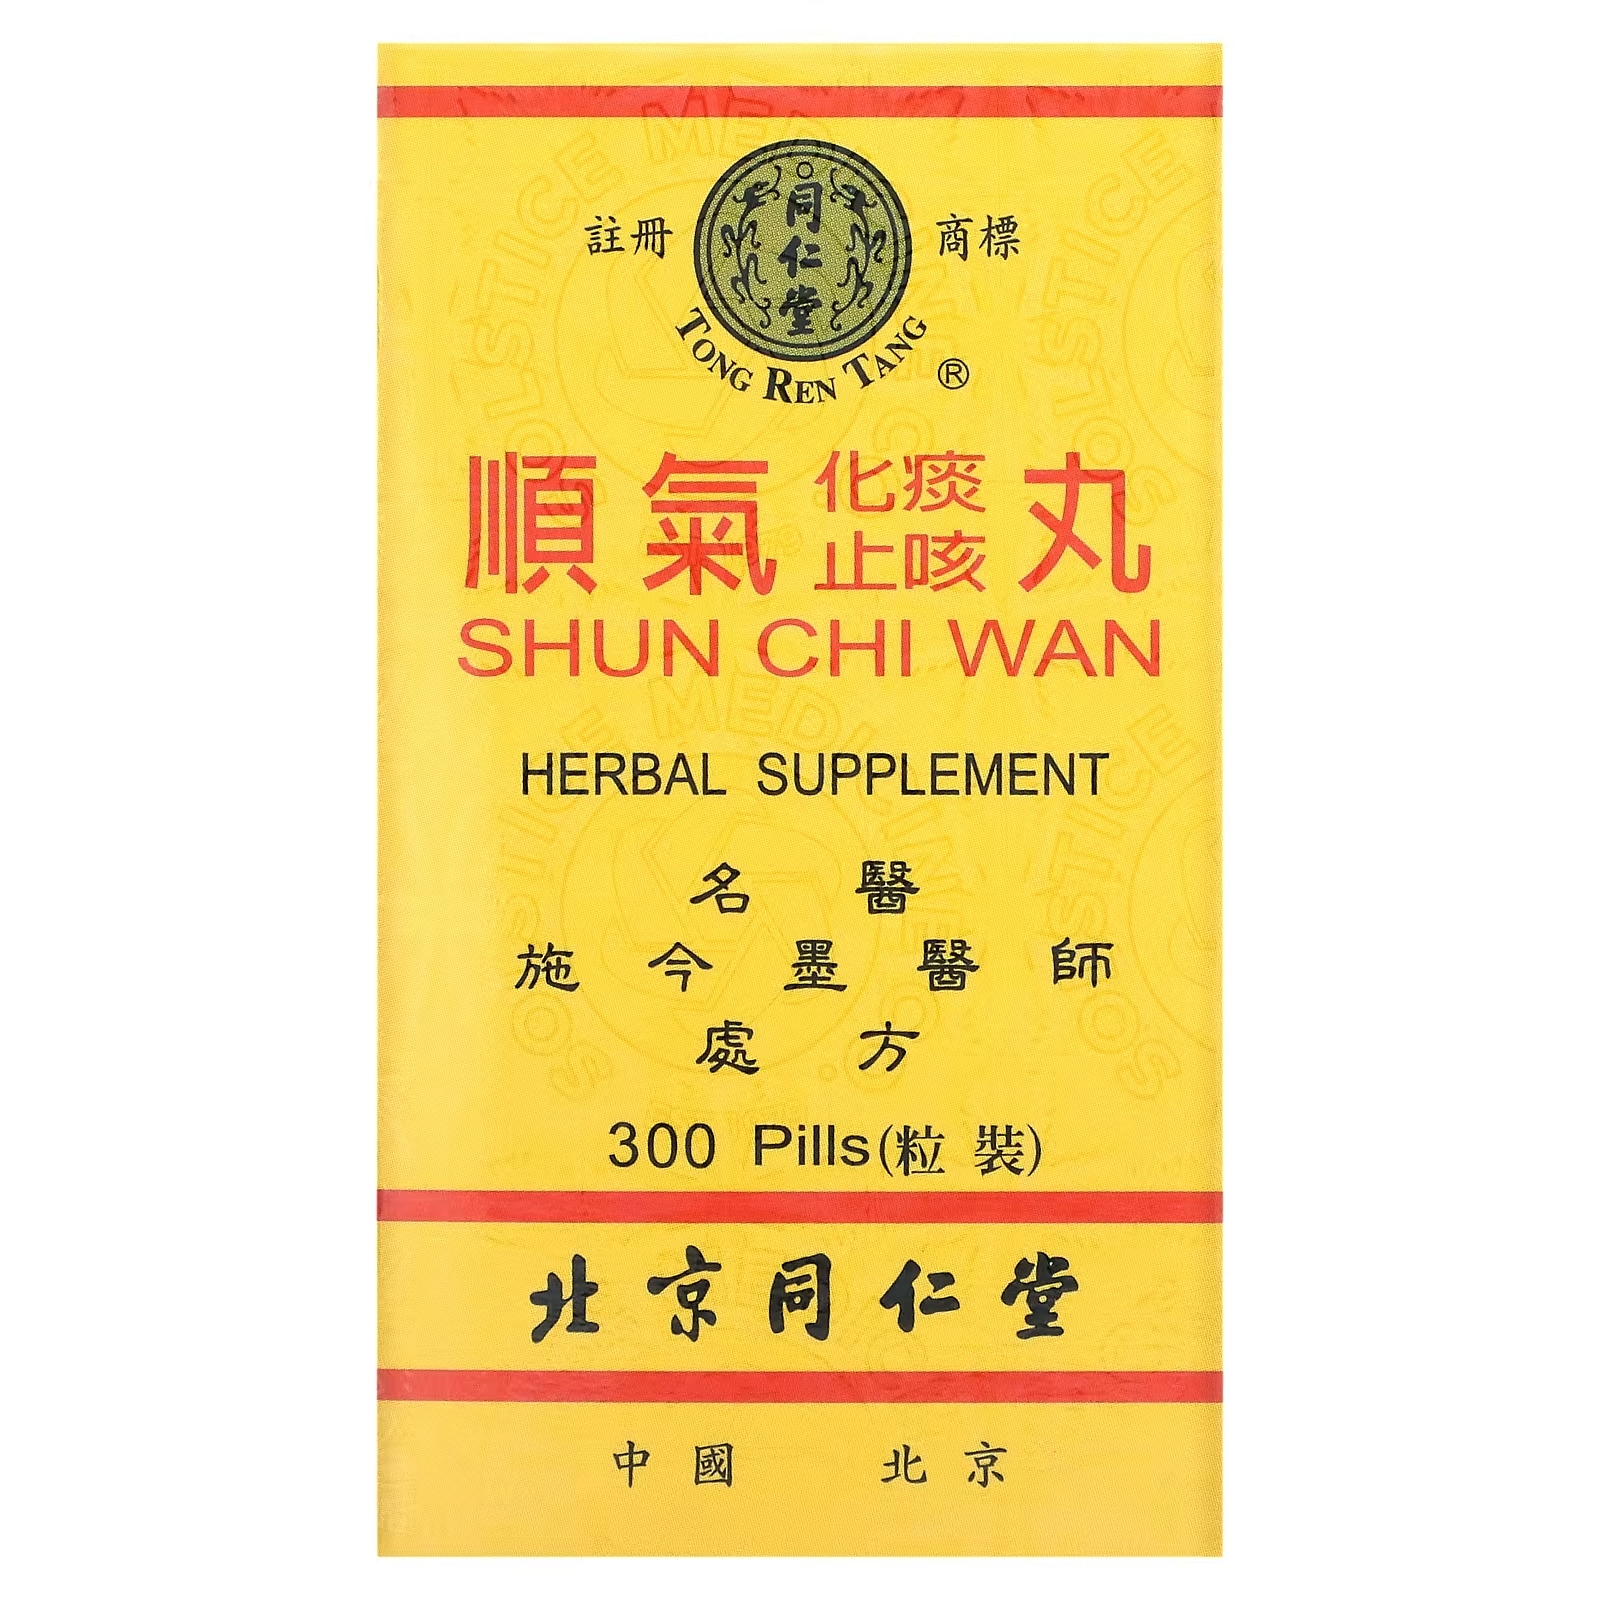 Tong Ren Tang Shun Chi Wan Supports the Health of the Nose Throat Larynx Trachea and Lungs, 300 таблеток tong ren tang shun chi wan supports the health of the nose throat larynx trachea and lungs 300 таблеток